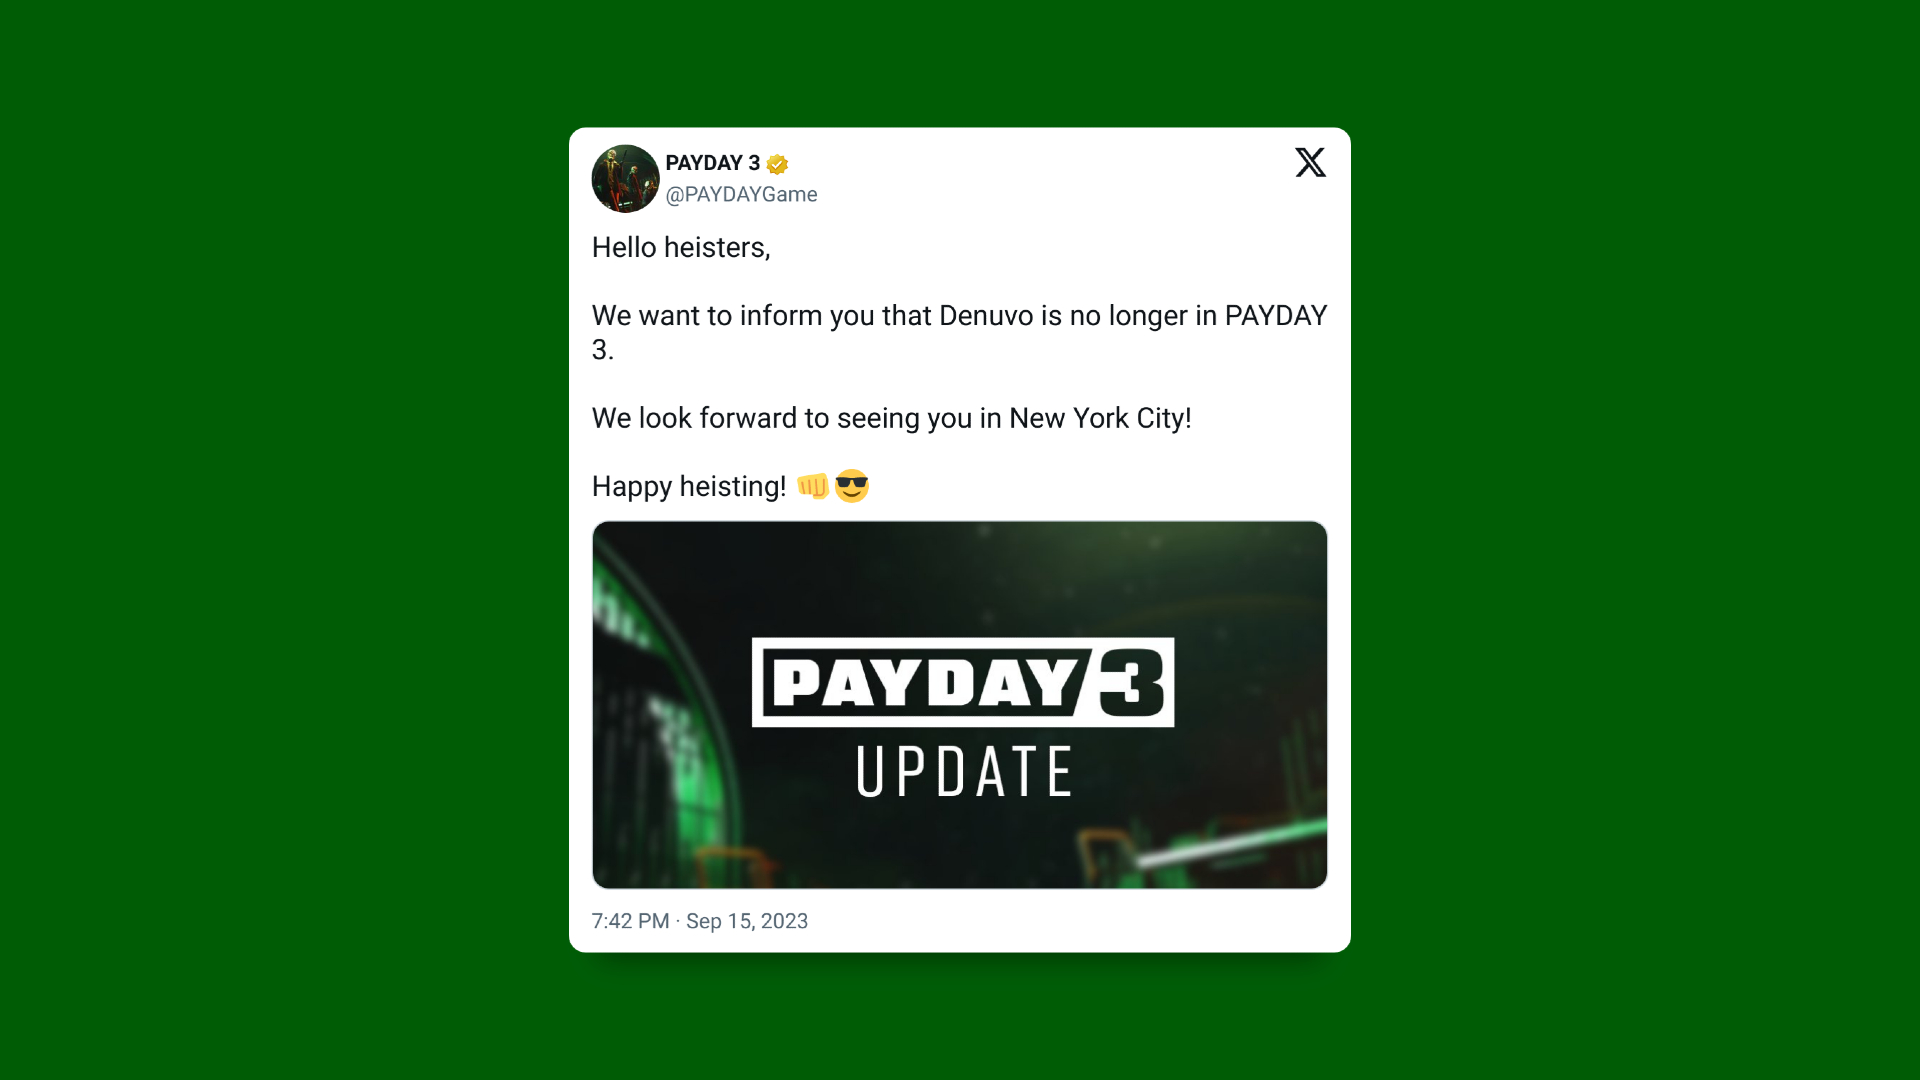 Payday 3 Twitter post revealing that Denuvo has been removed from the game